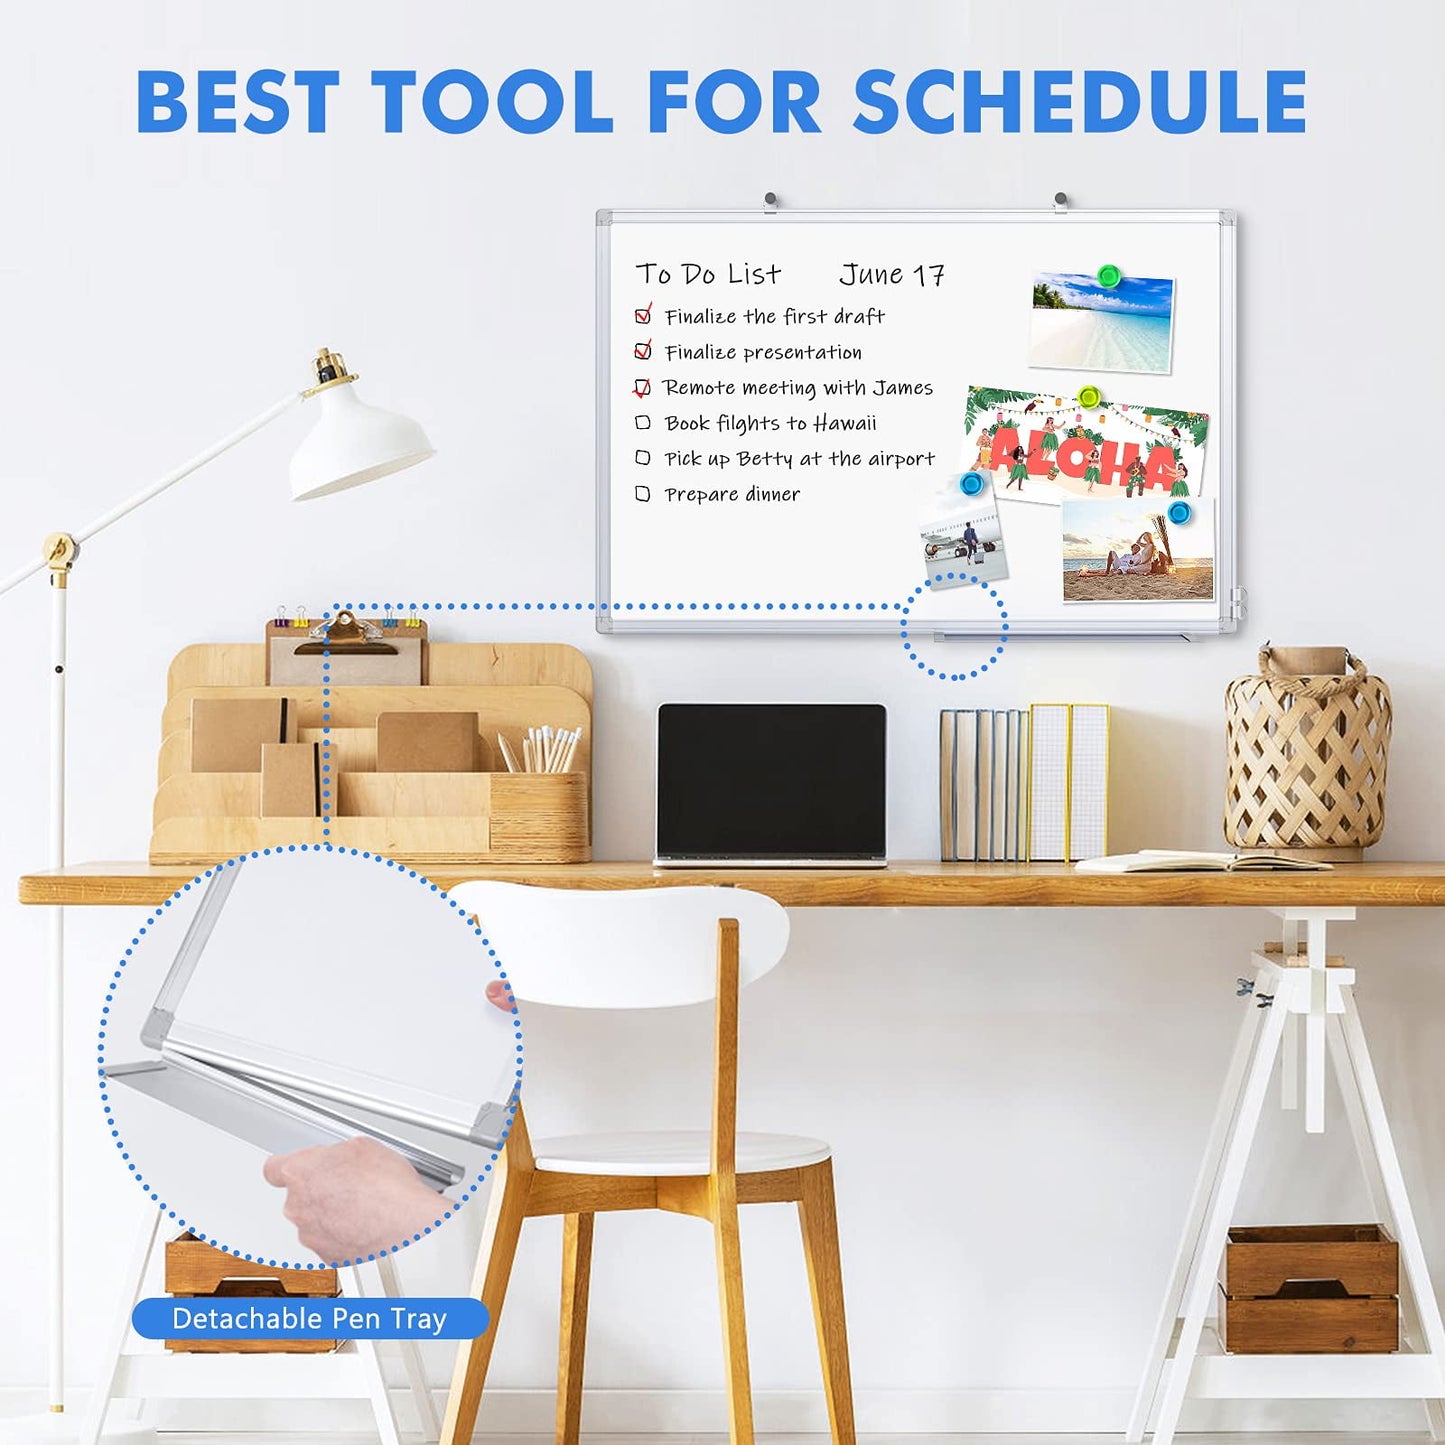 Maxtek Magnetic White Board 36 x 24 Dry Erase Board Wall Mounted,3' x 2' Marker Whiteboard with Pen Tray for School, Home, Office, Silver Aluminum Frame